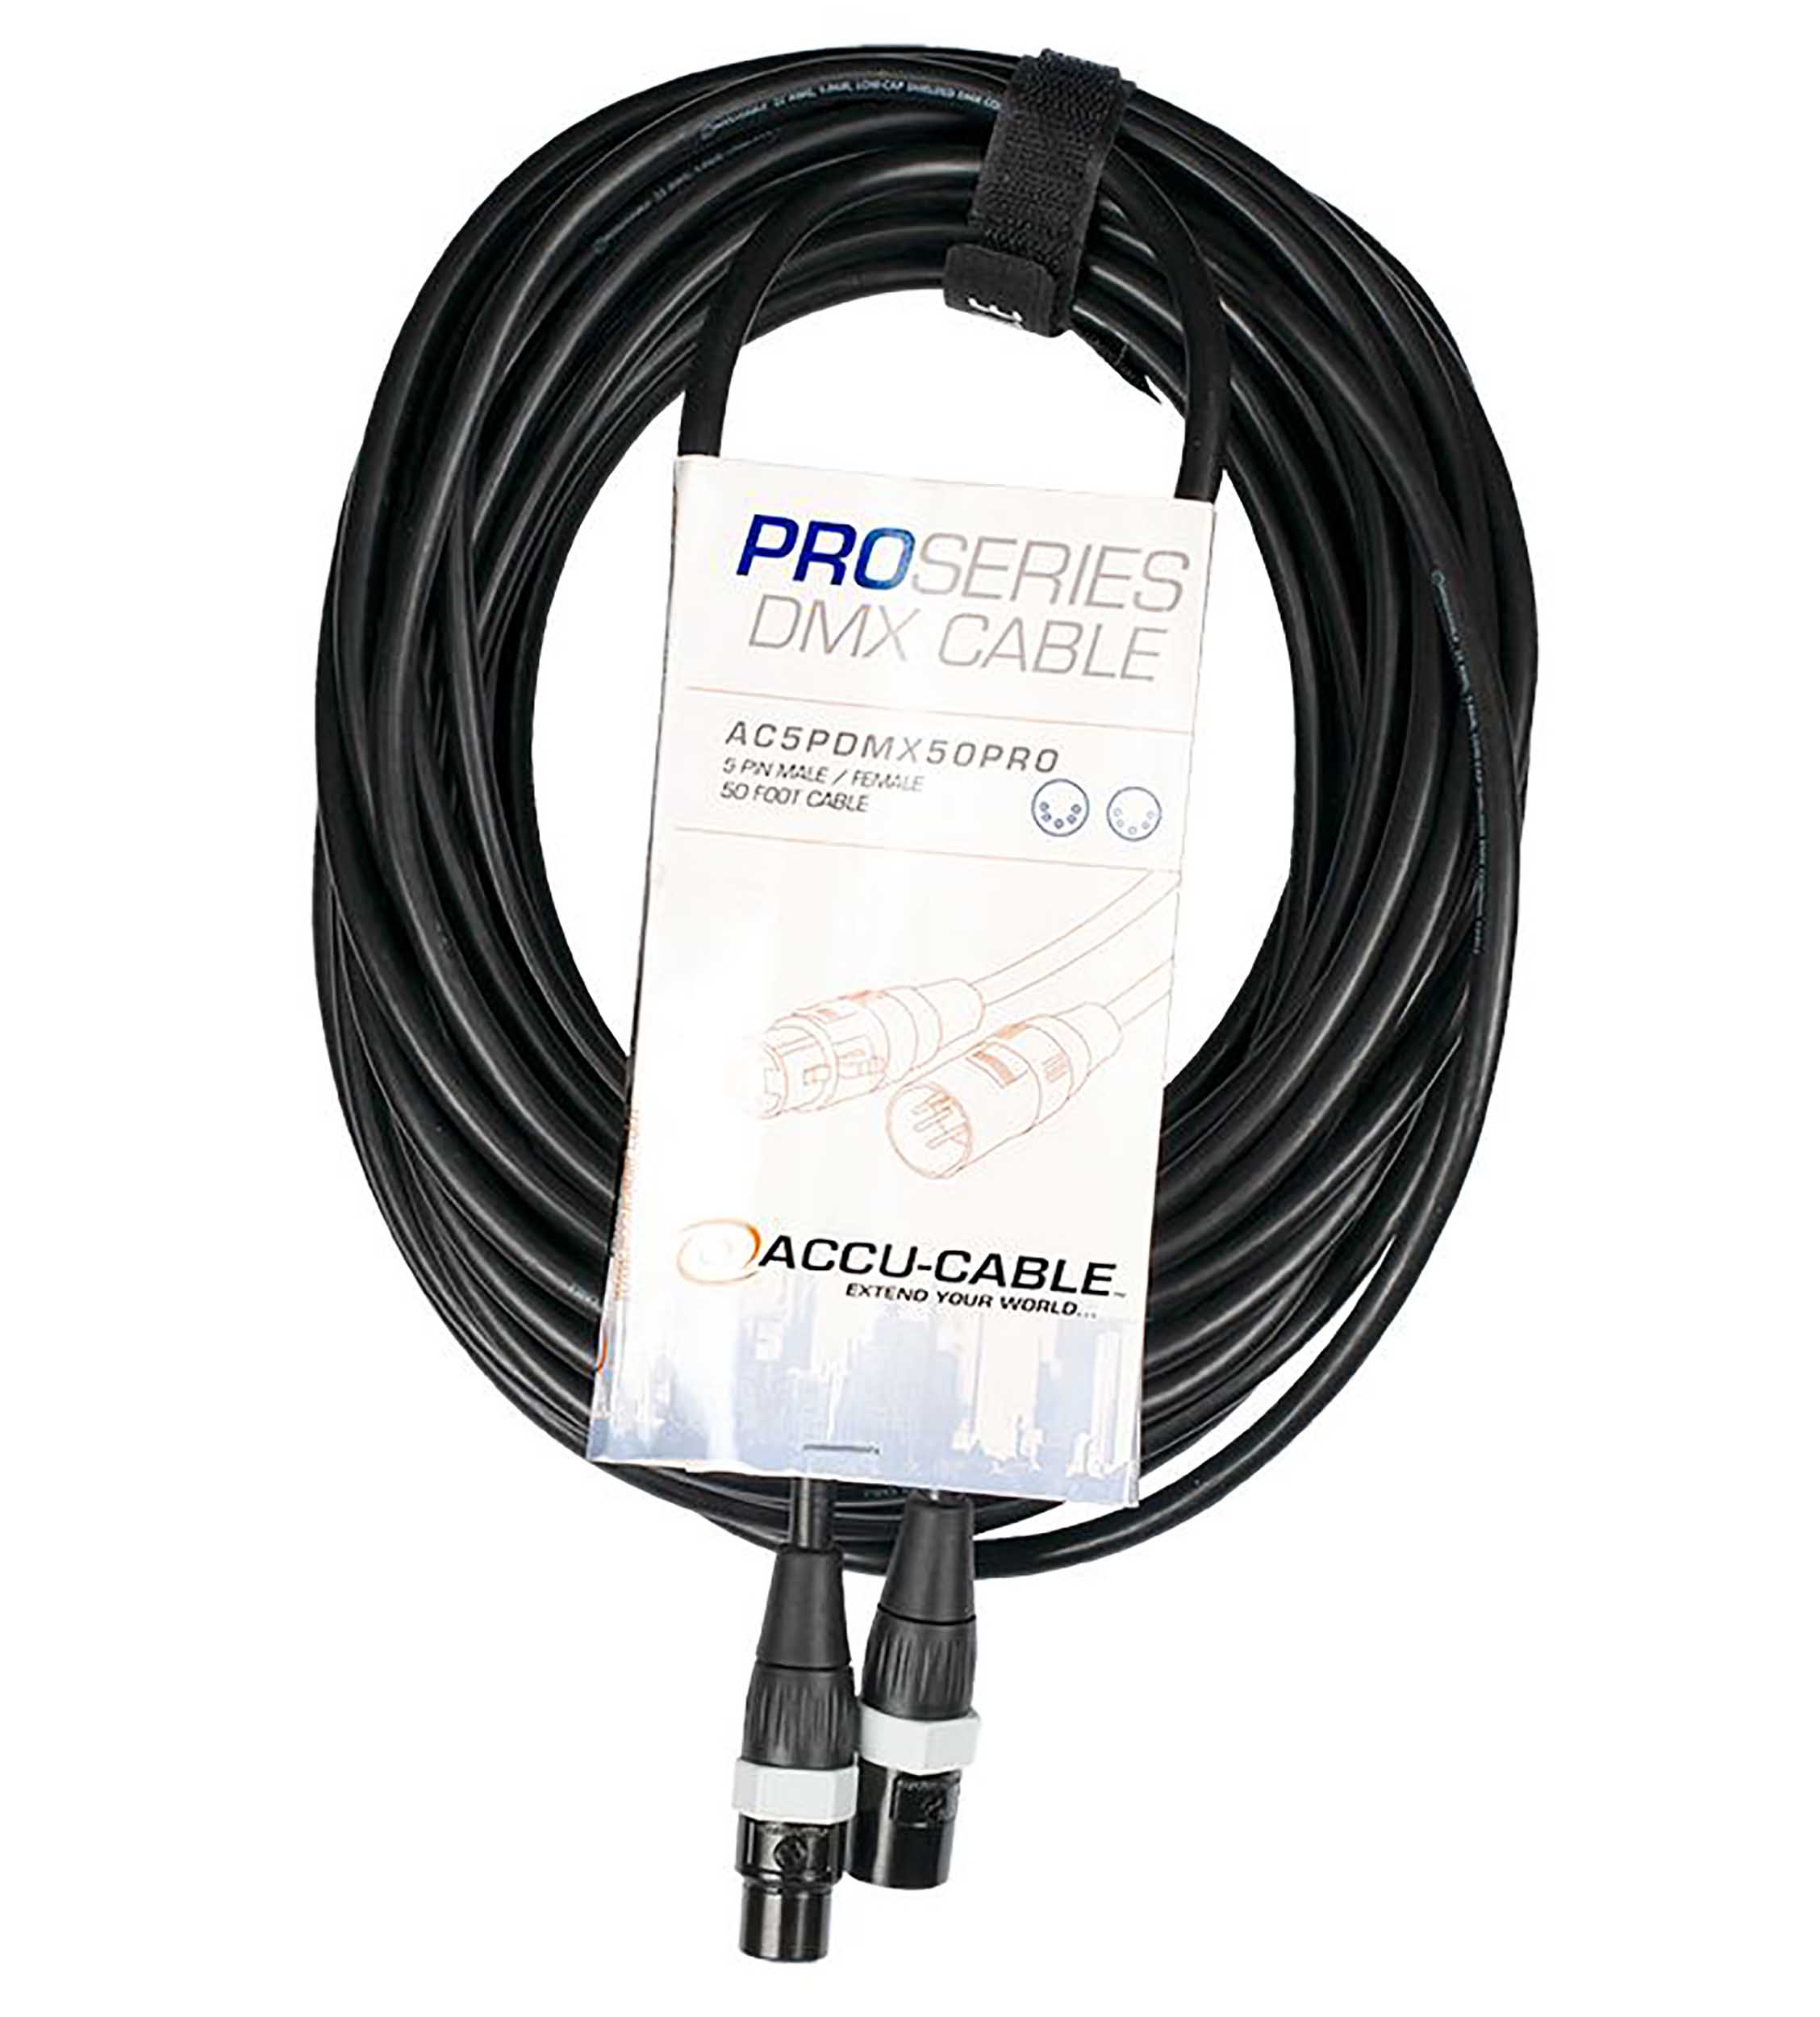 Accu-Cable AC5PDMX50PRO, Pro Series 5-Pin Male to 5-Pin Female Connection DMX Cable - 50 Ft by Accu Cable